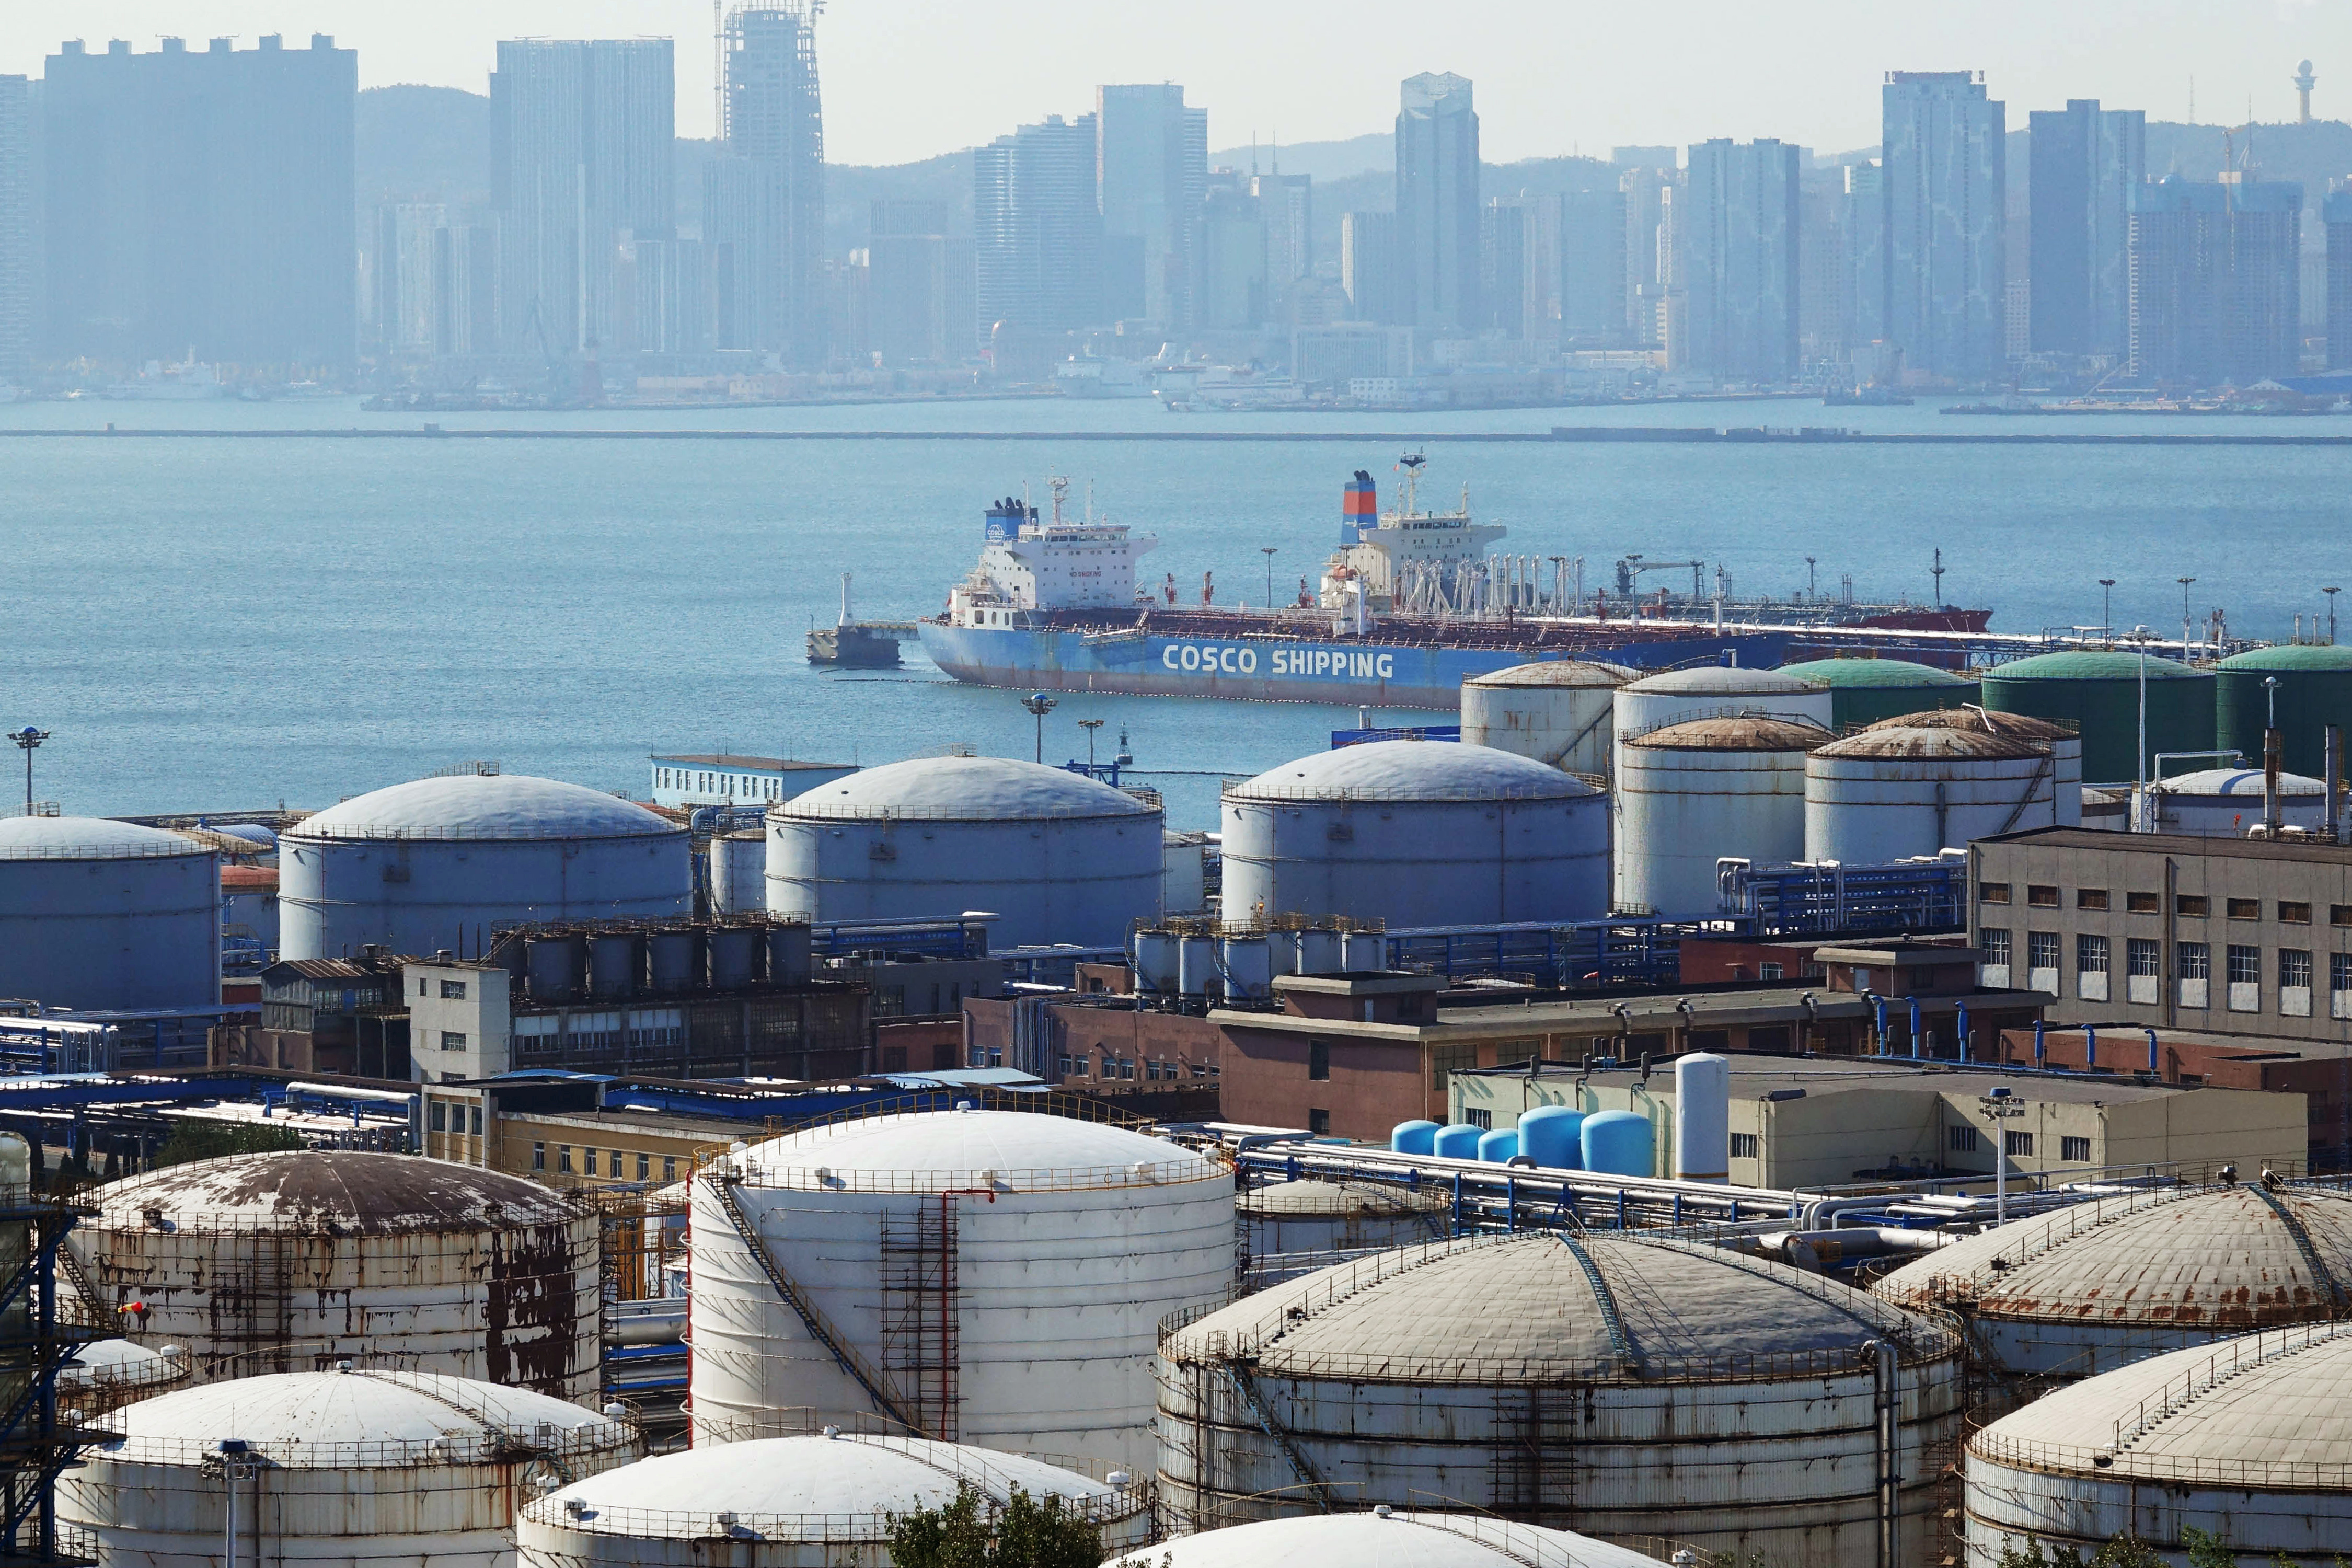 A China Ocean Shipping Company (COSCO) vessel is seen near oil tanks at the China National Petroleum Corporation (CNPC)'s Dalian Petrochemical Corp in Dalian, Liaoning province, China October 15, 2019. REUTERS/Stringer.